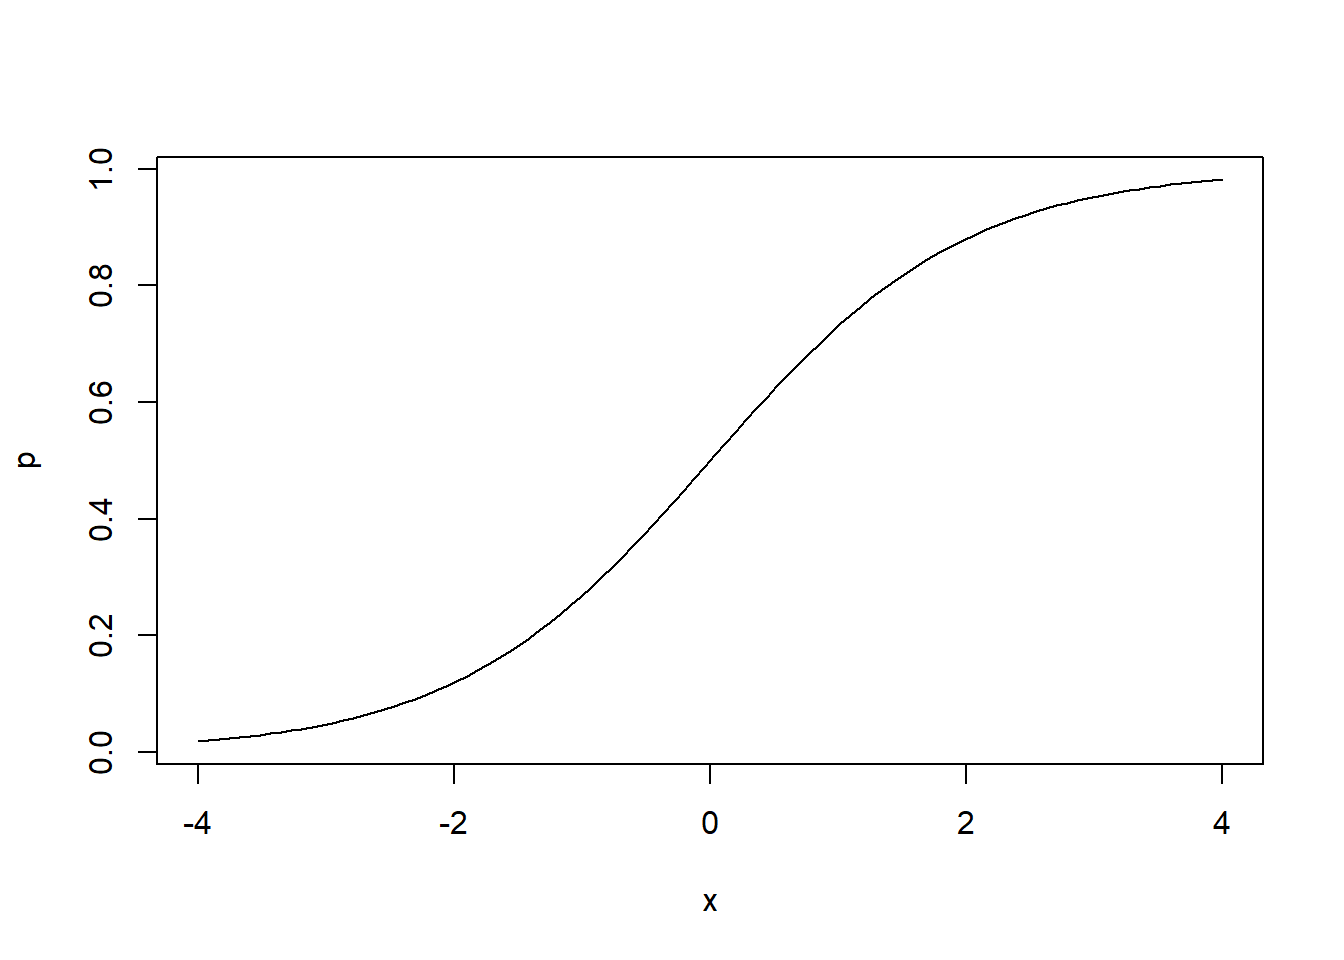 Plot of numbers on x axis ranging from -4 to 4 versus logistic transformation of those same numbers on y axis to range from 0 to 1.